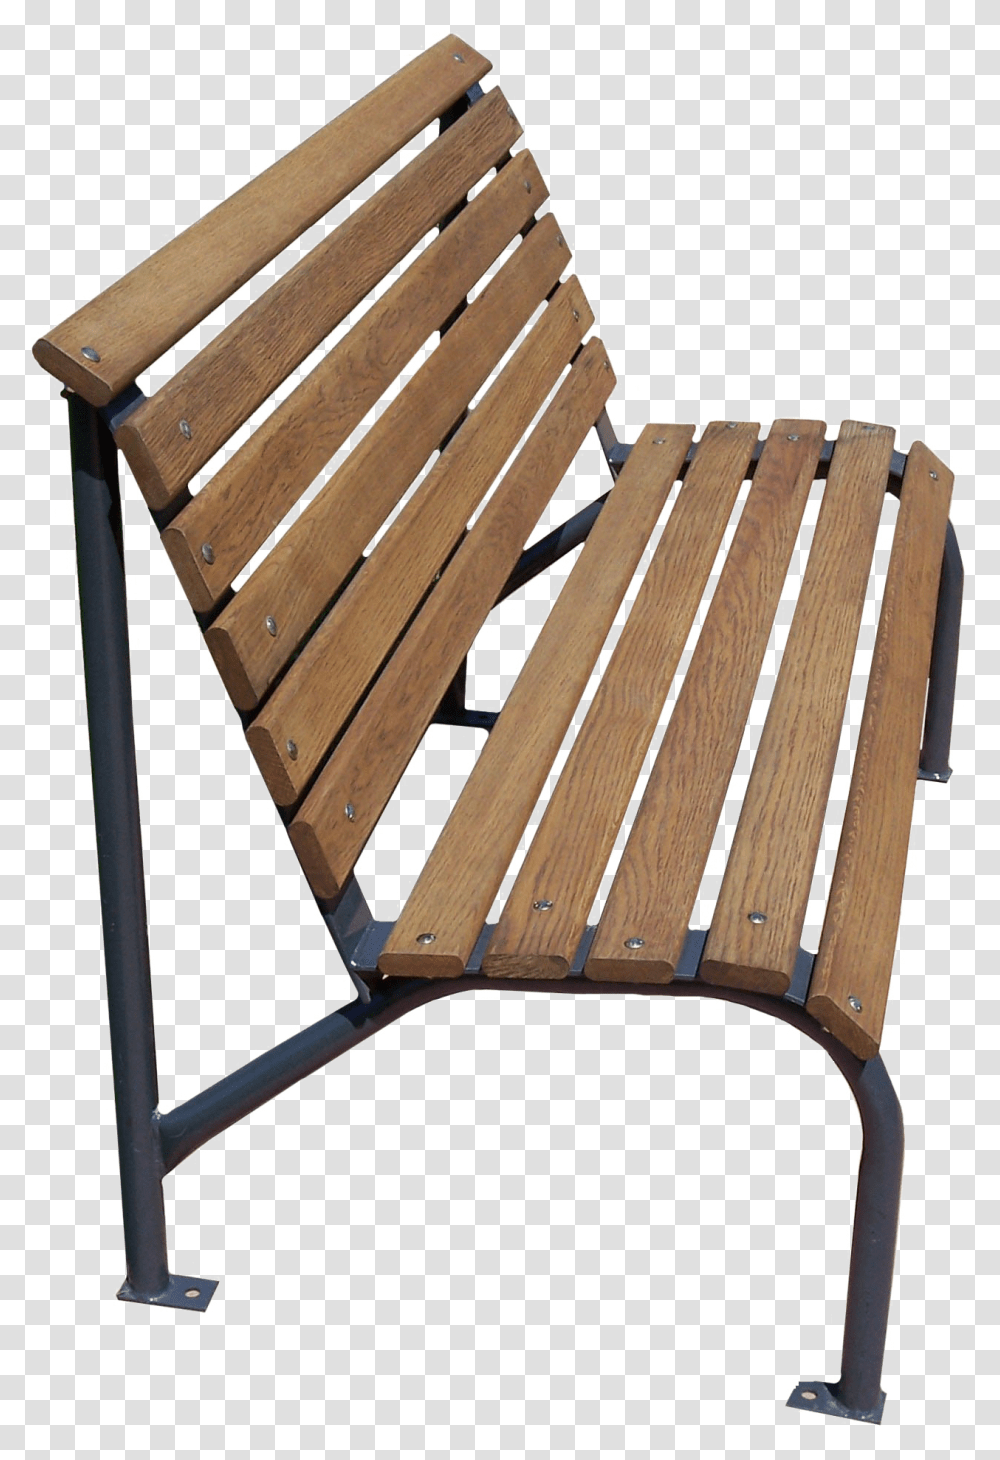 Park Bench Free Download Bench, Furniture, Chair Transparent Png